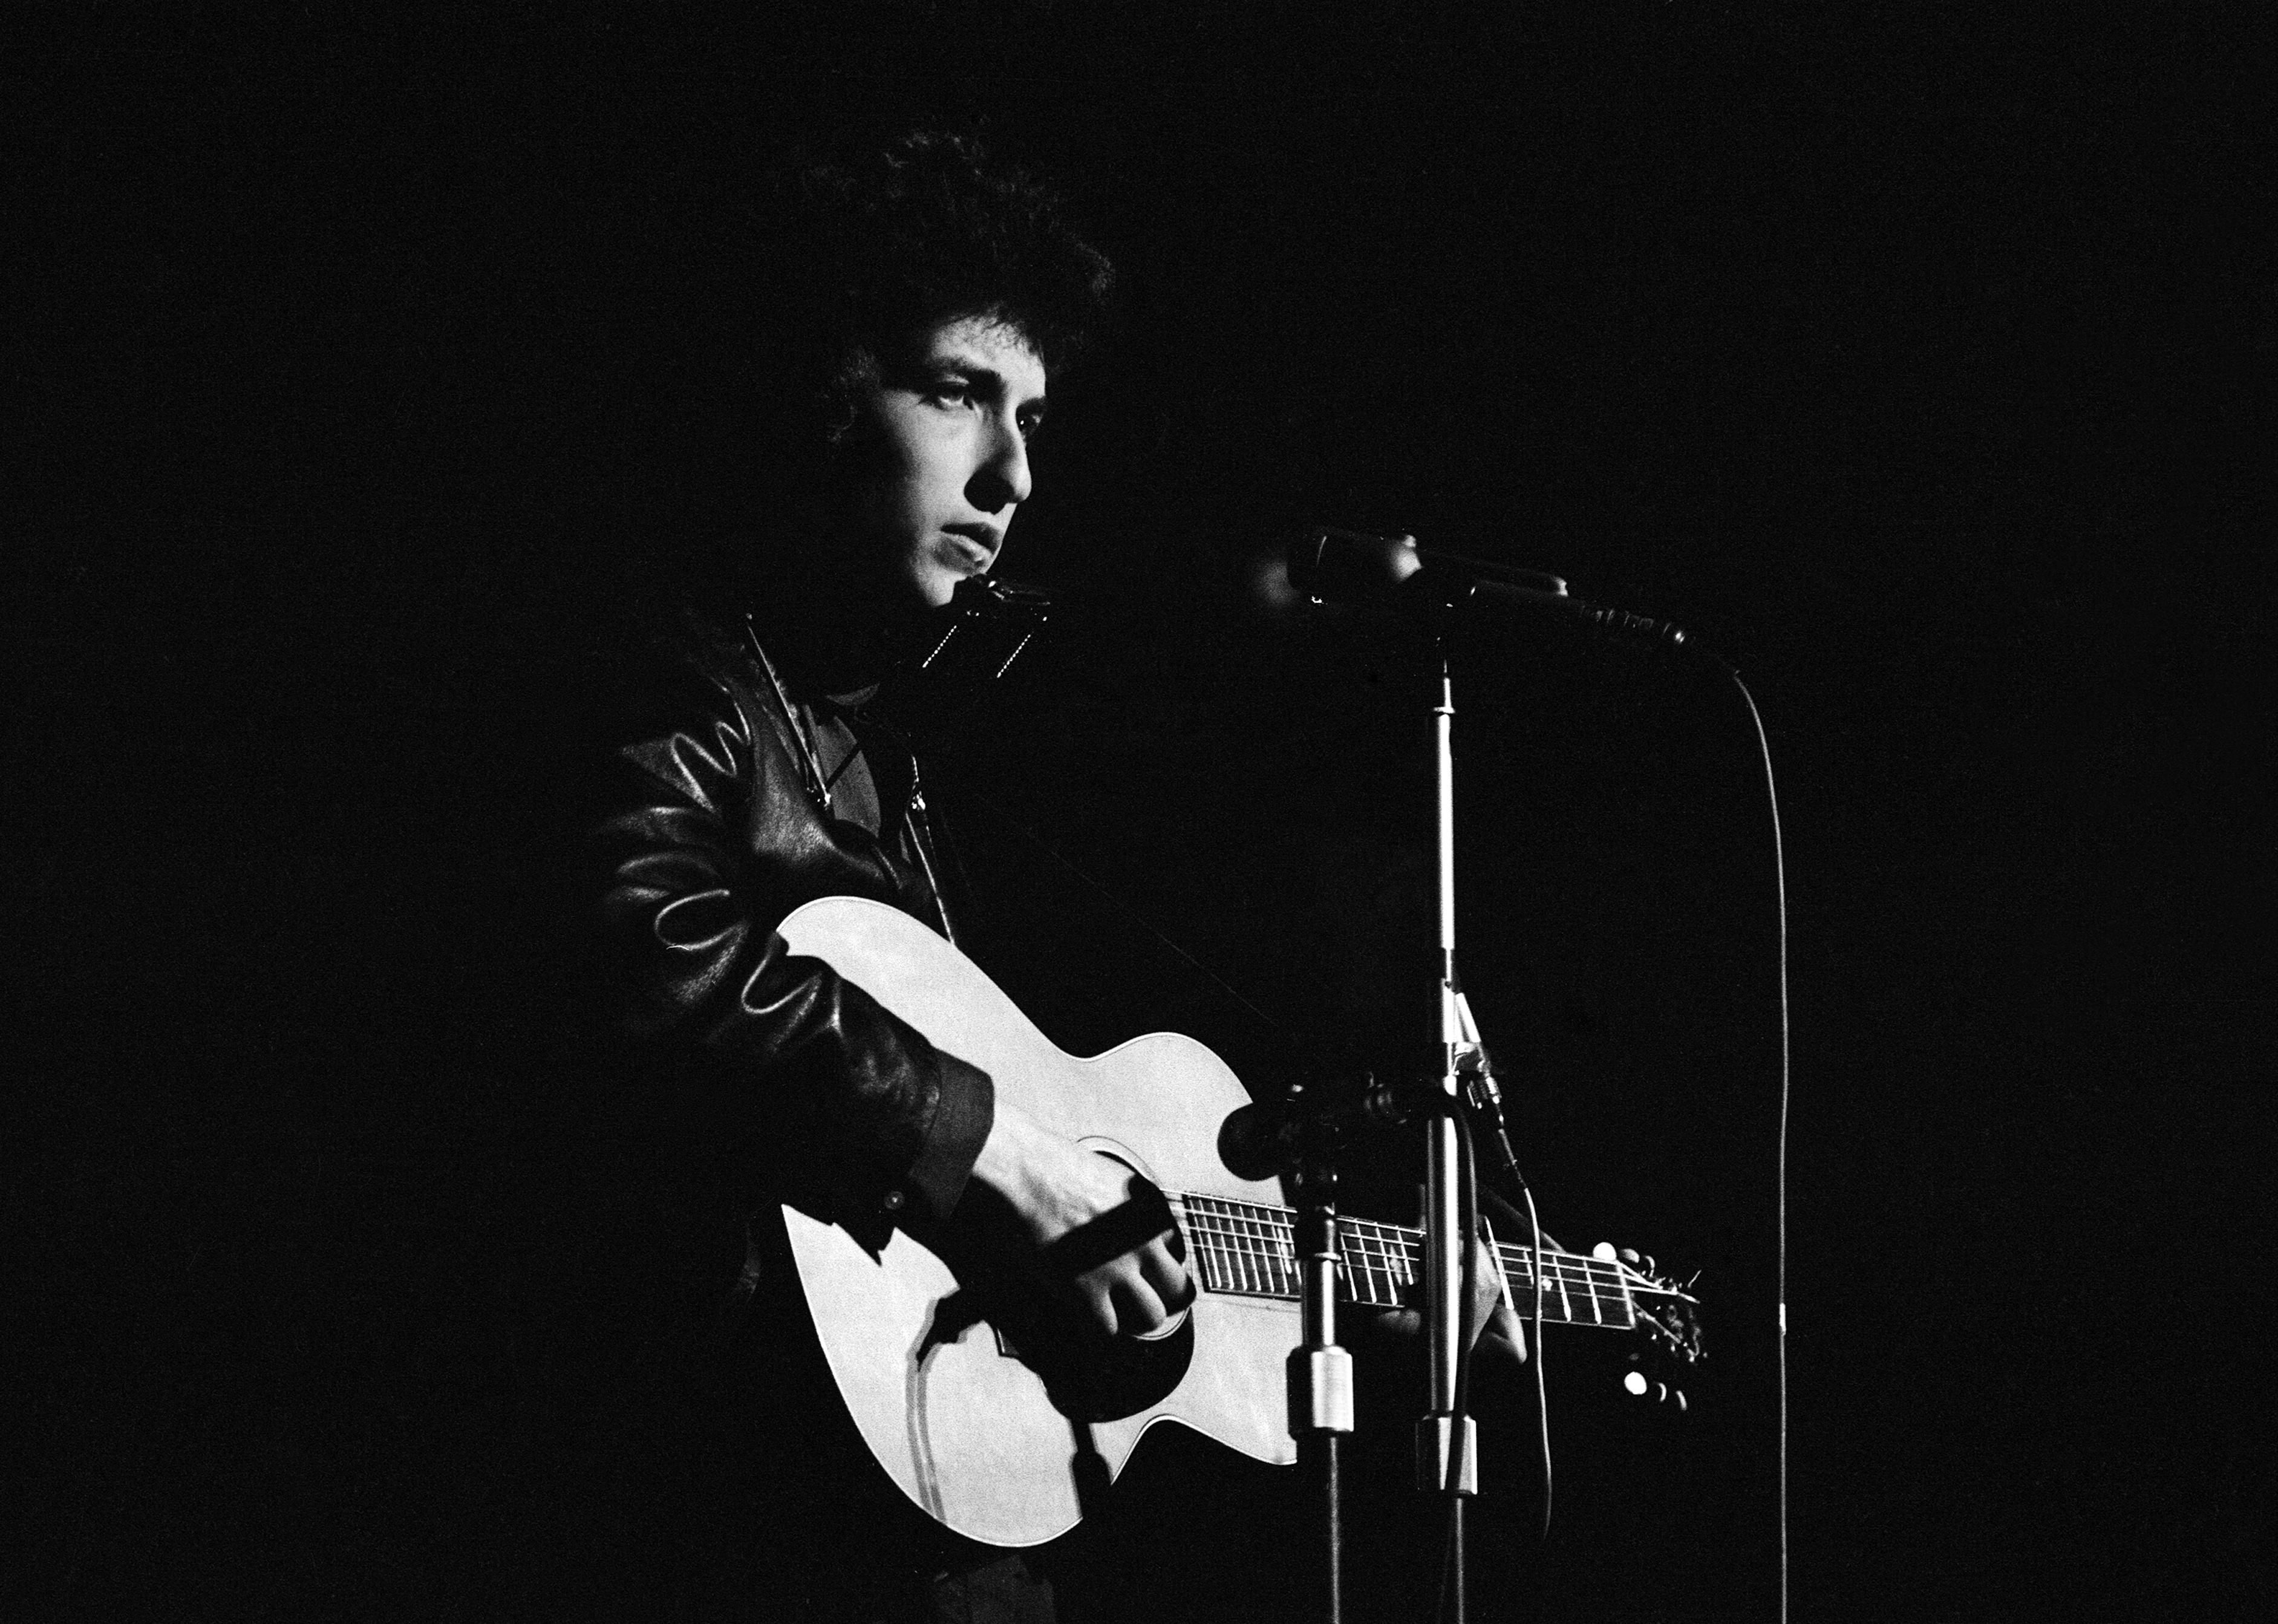 <p>After going electric to the chagrin of certain fans, Bob Dylan embarked on this famous world concert tour. Backing band The Hawks joined him for the electric portion of each show, which drew <a href="https://guitar.com/news/music-news/robbie-robertson-dylan-goes-electric-judas/">jeers and the occasional projectile object</a>. The Hawks went on to become Canadian-American rock group The Band.</p>